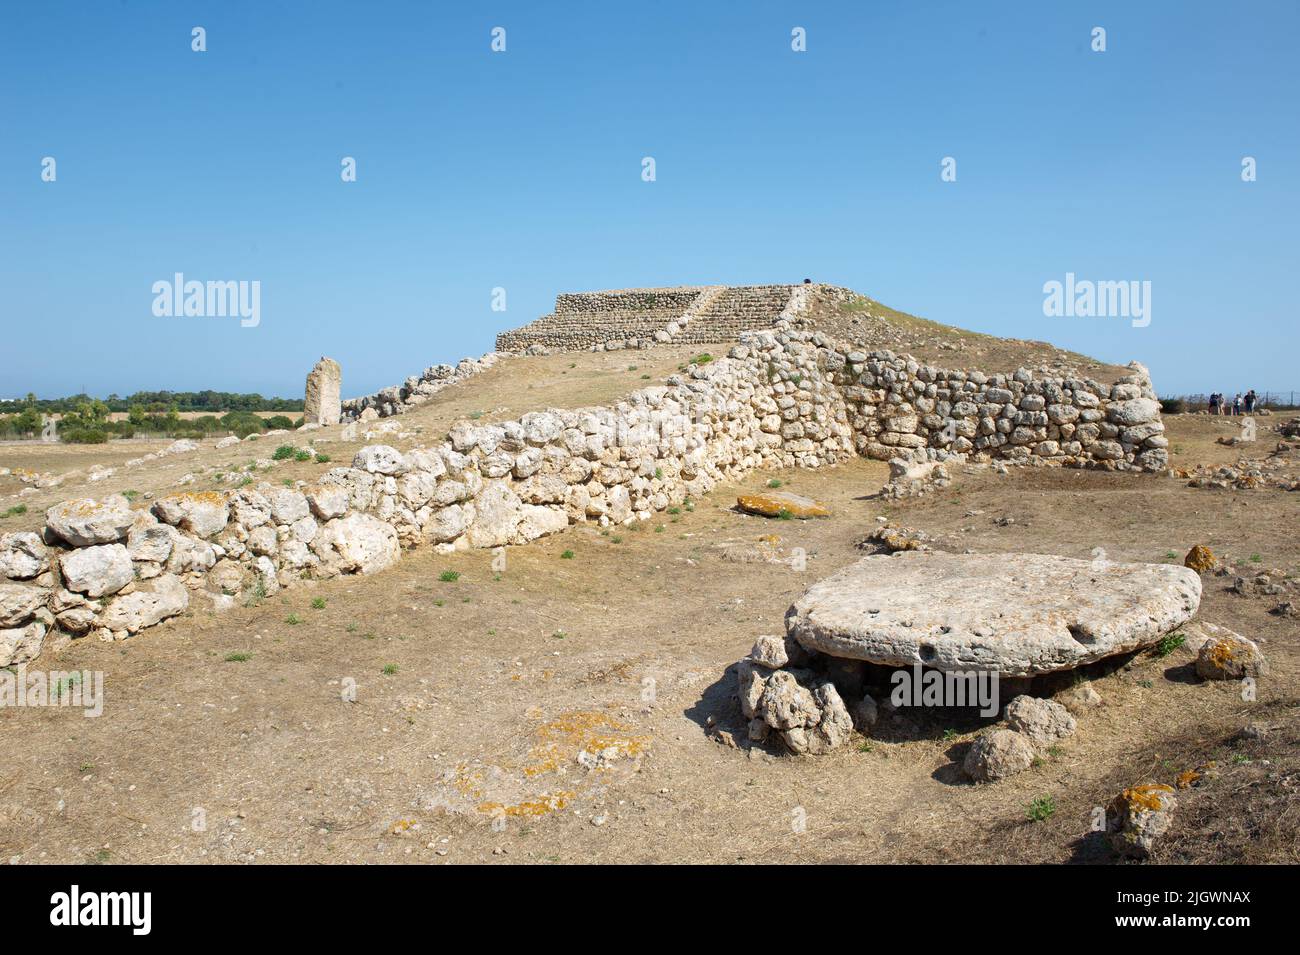 6 june 2021 - Europa, Italy, Sardinia Prehistoric altar Monte d'Accoddi is megalithic monument in Sassari,  Ruins of ancient step pyramid and a menhir Stock Photo